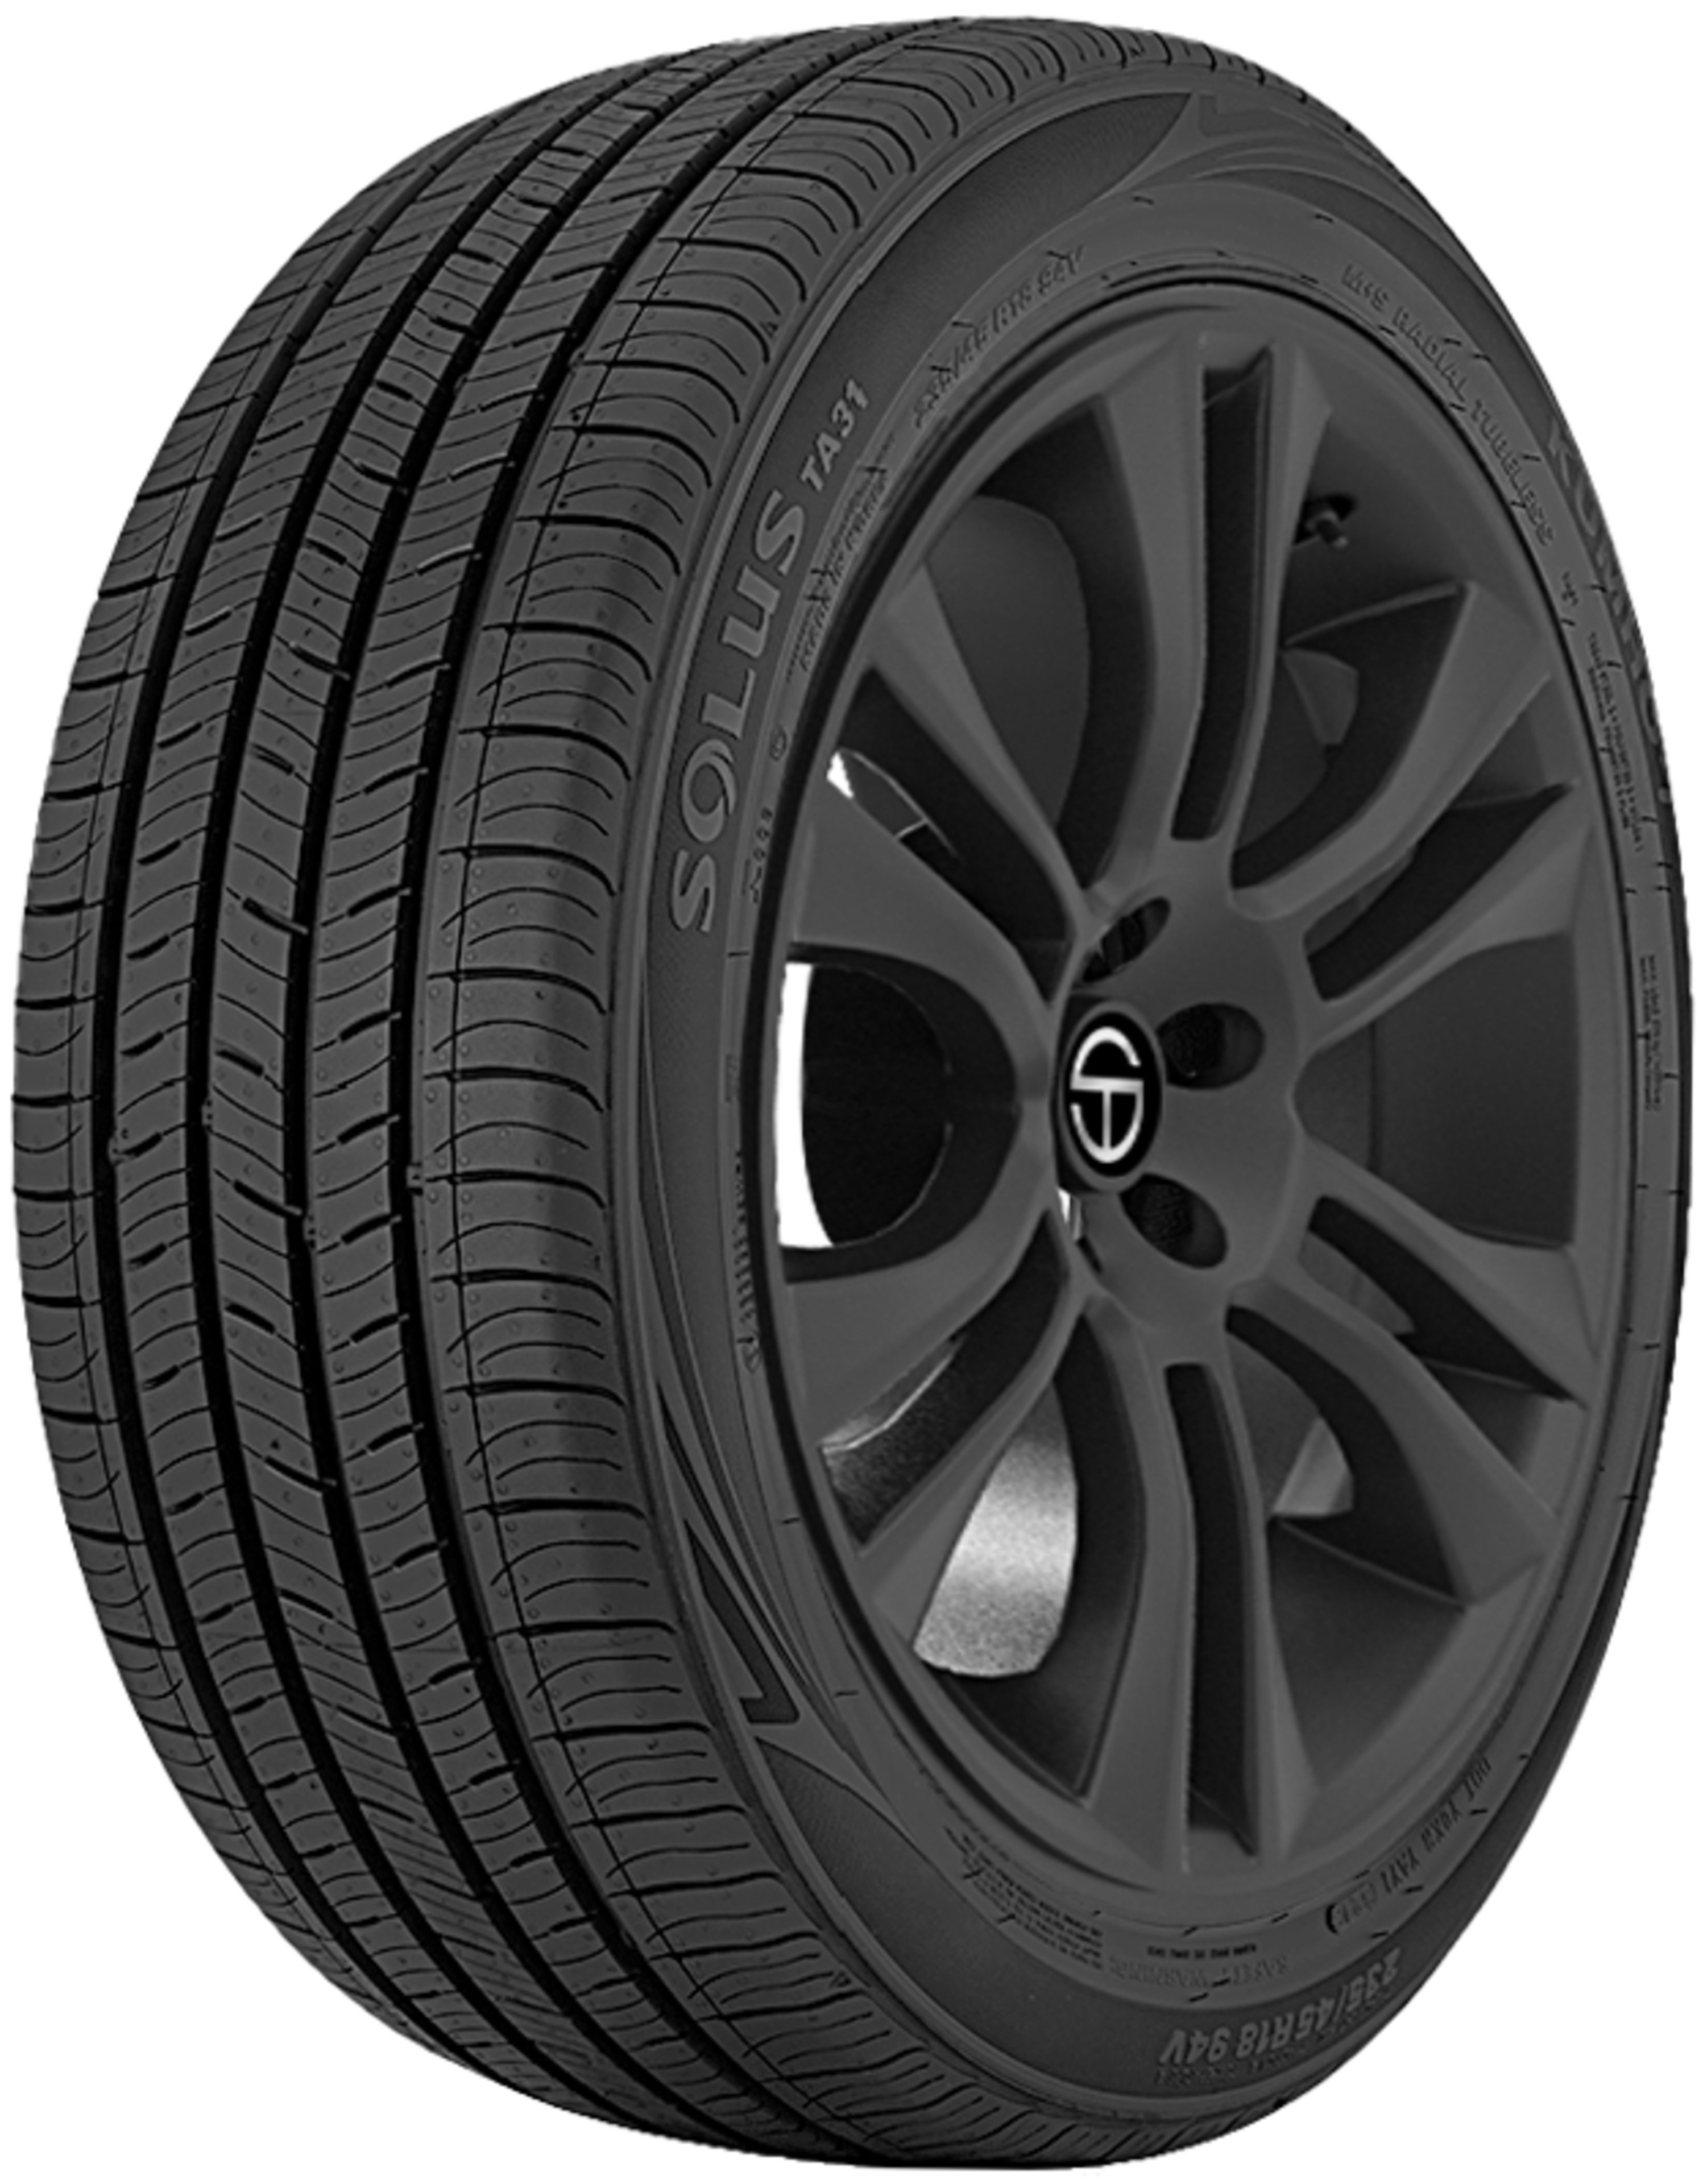 Shop for 195/65R15 Tires for Your Vehicle SimpleTire